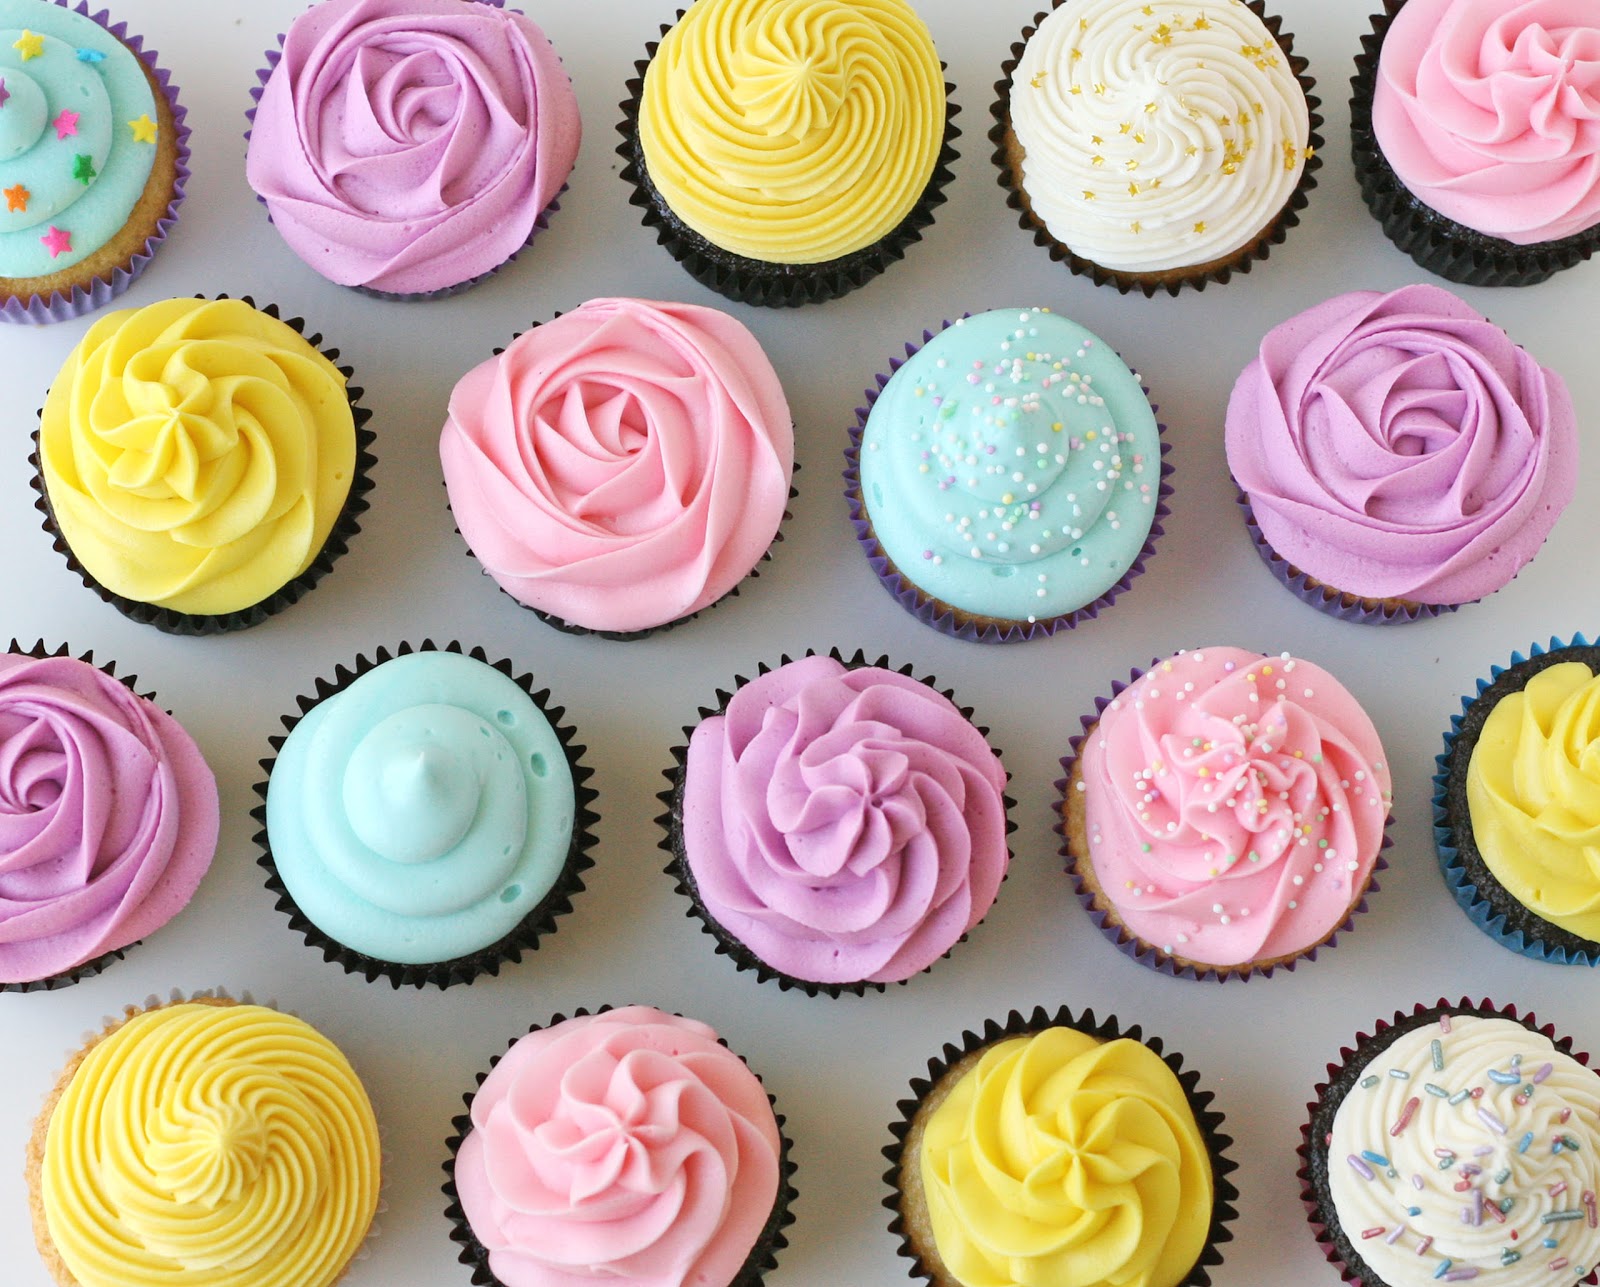 Cupcake Decorating Tips with Video  Cupcake decorating tips, Desserts,  Cupcake cakes